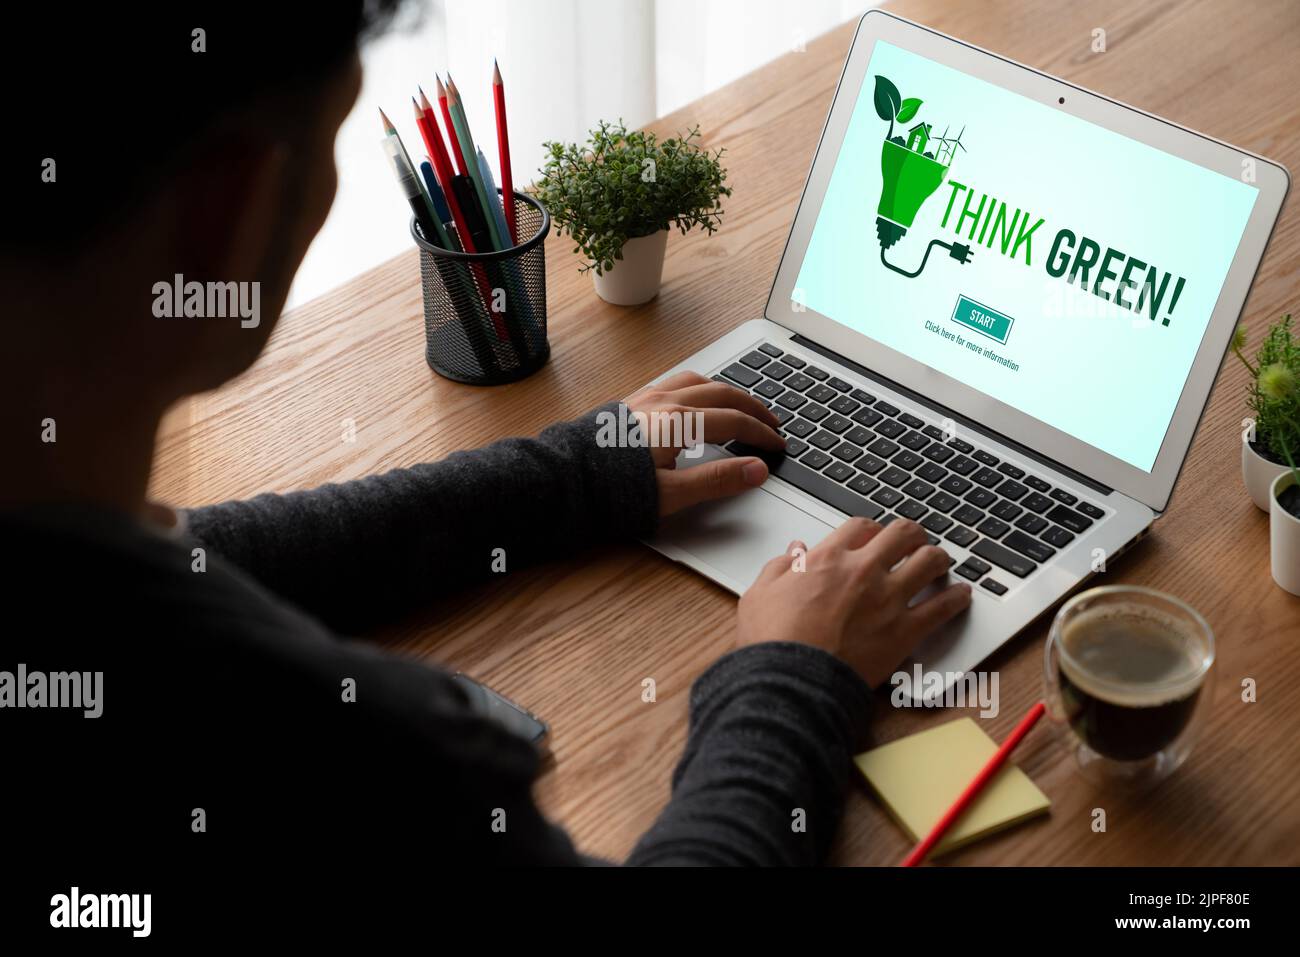 Green business transformation for modish corporate business to thank green marketing strategy Stock Photo